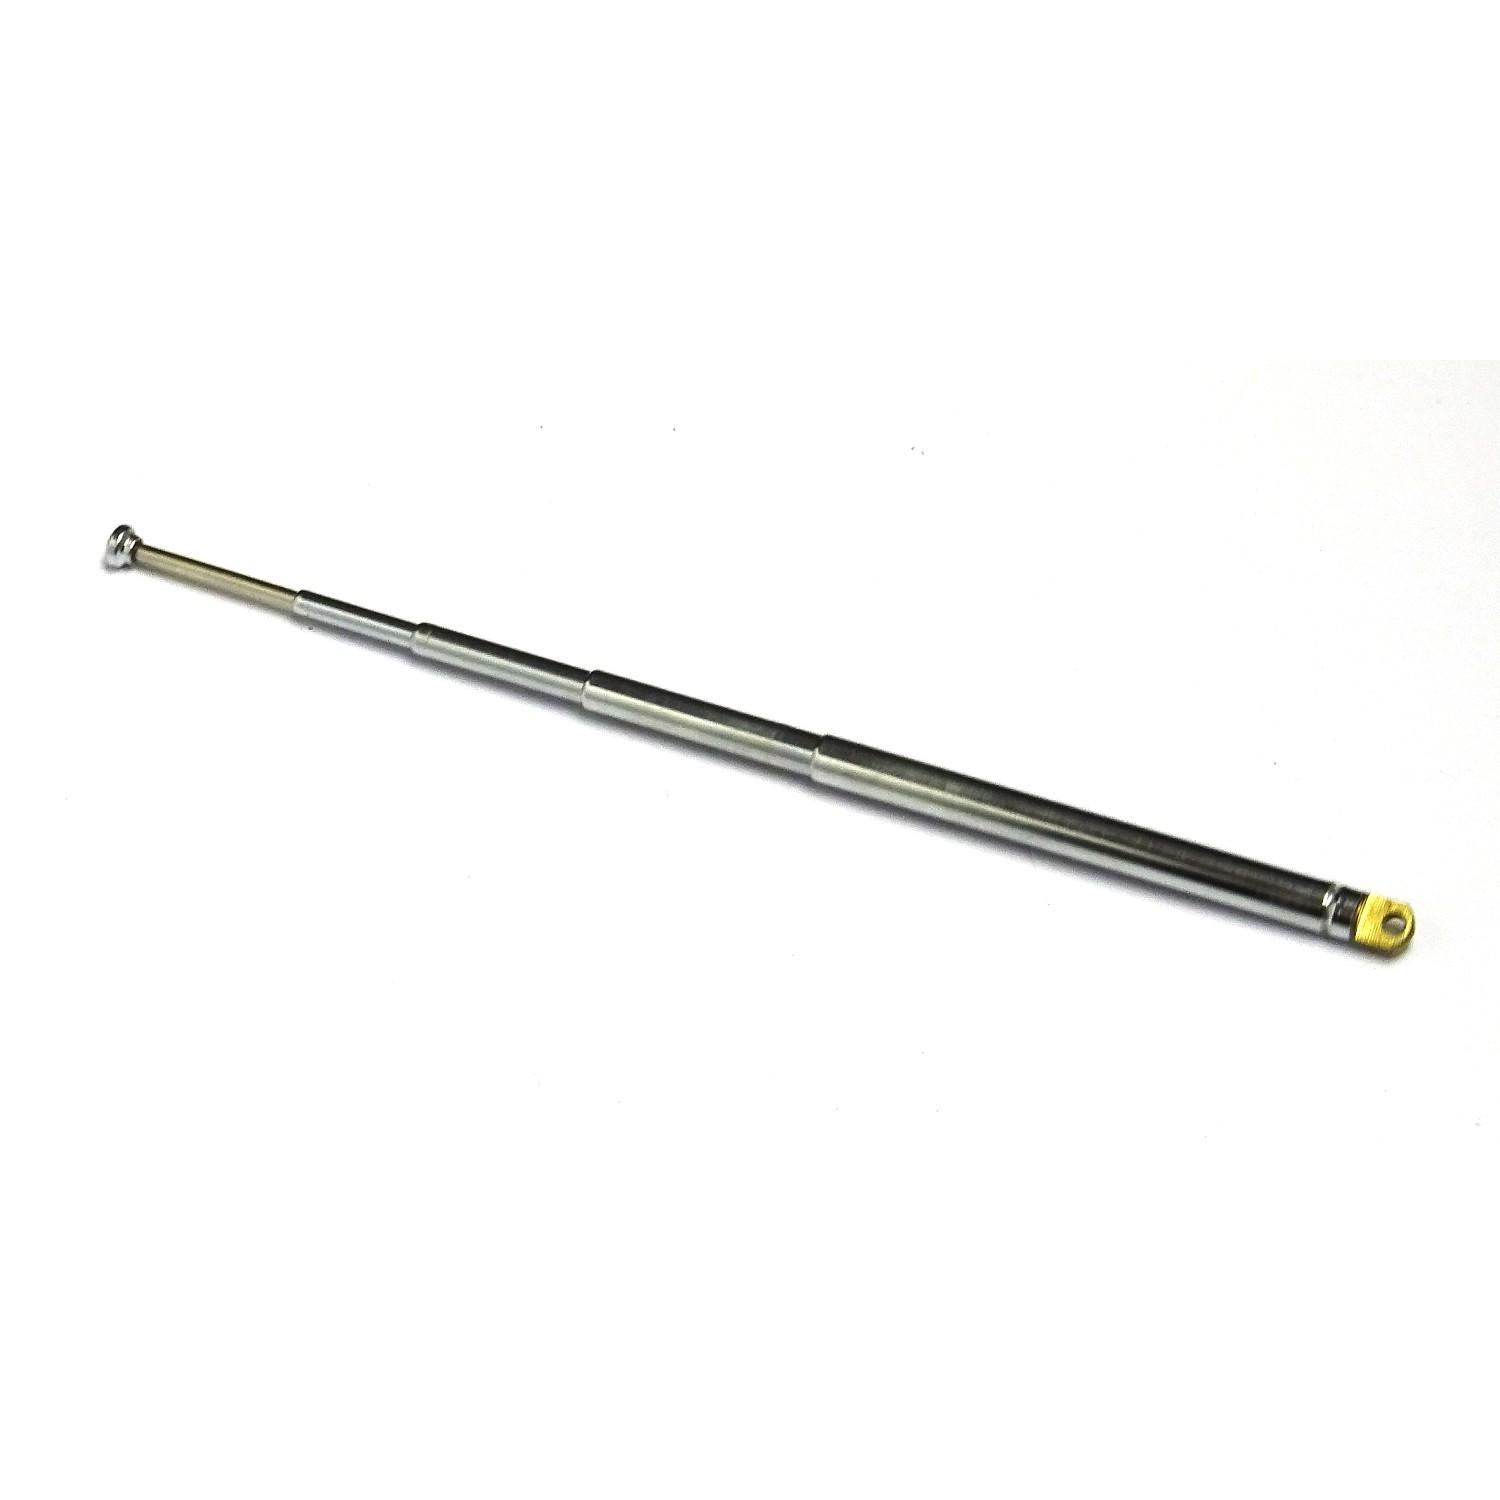 Replacement 5 Sections Telescopic Antenna Aerial for Car Phone Radio TV - UK Seller